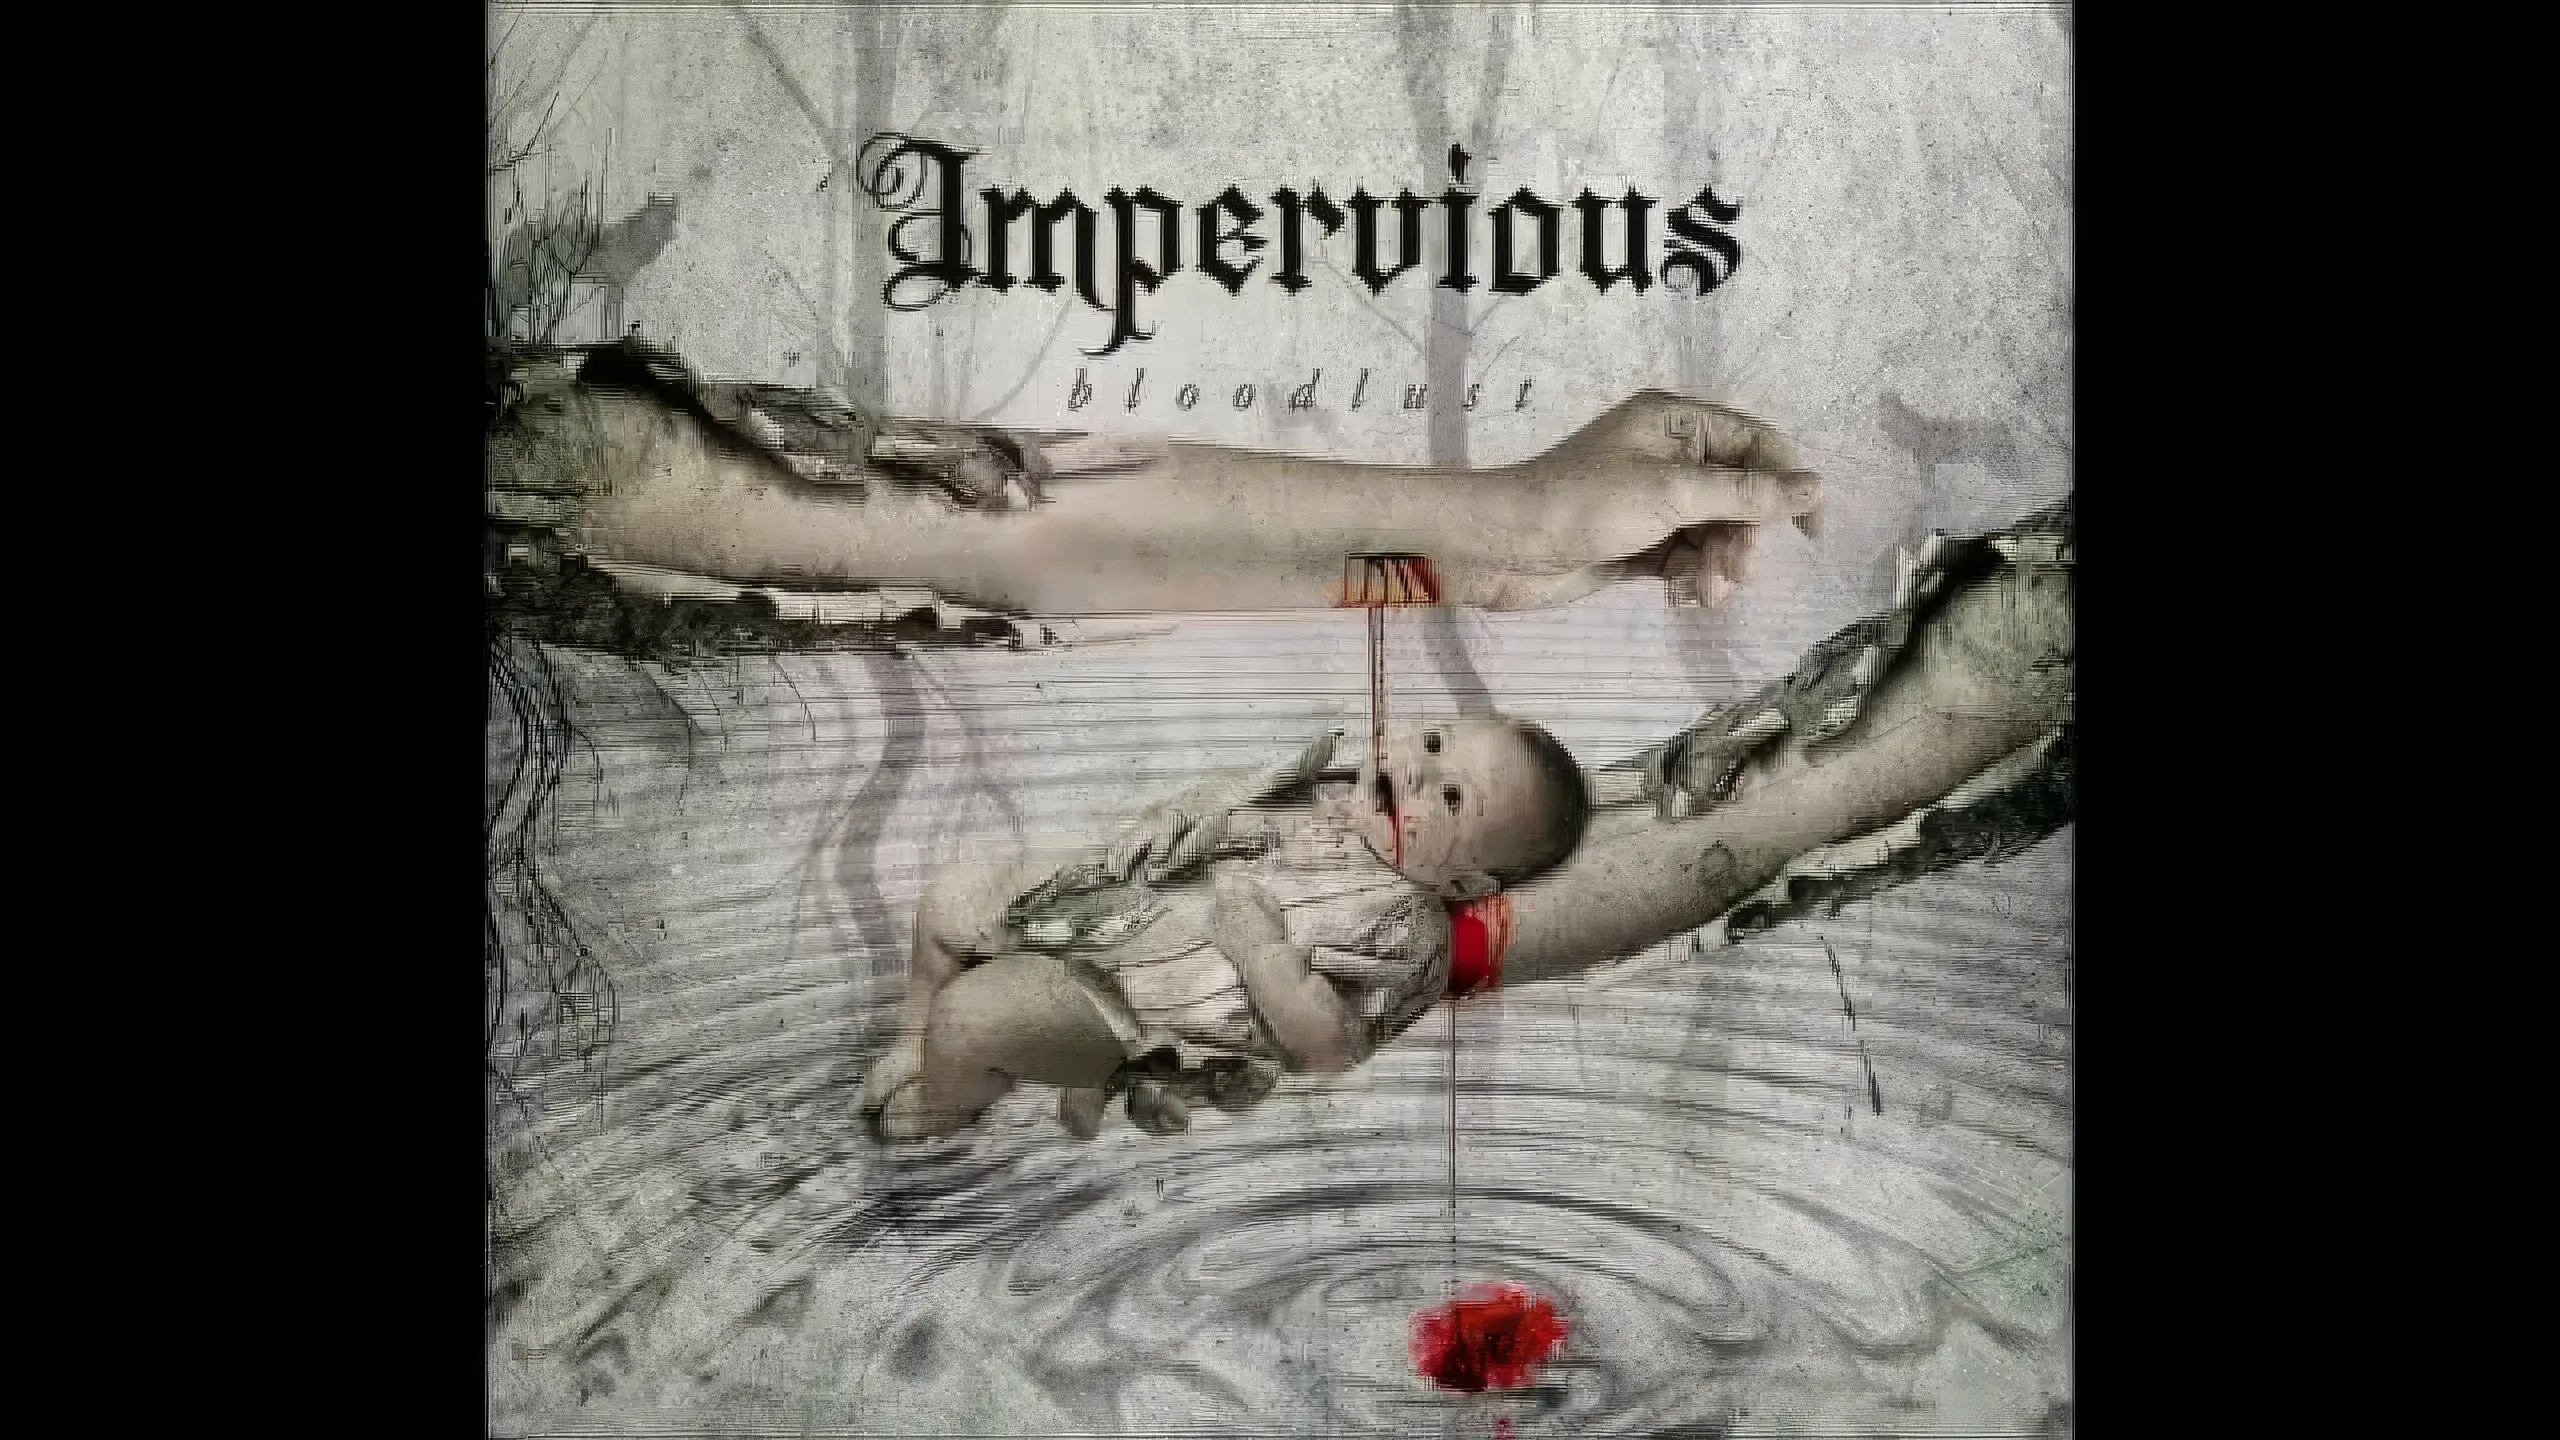 YouTube Impervious - Blood is the life promo